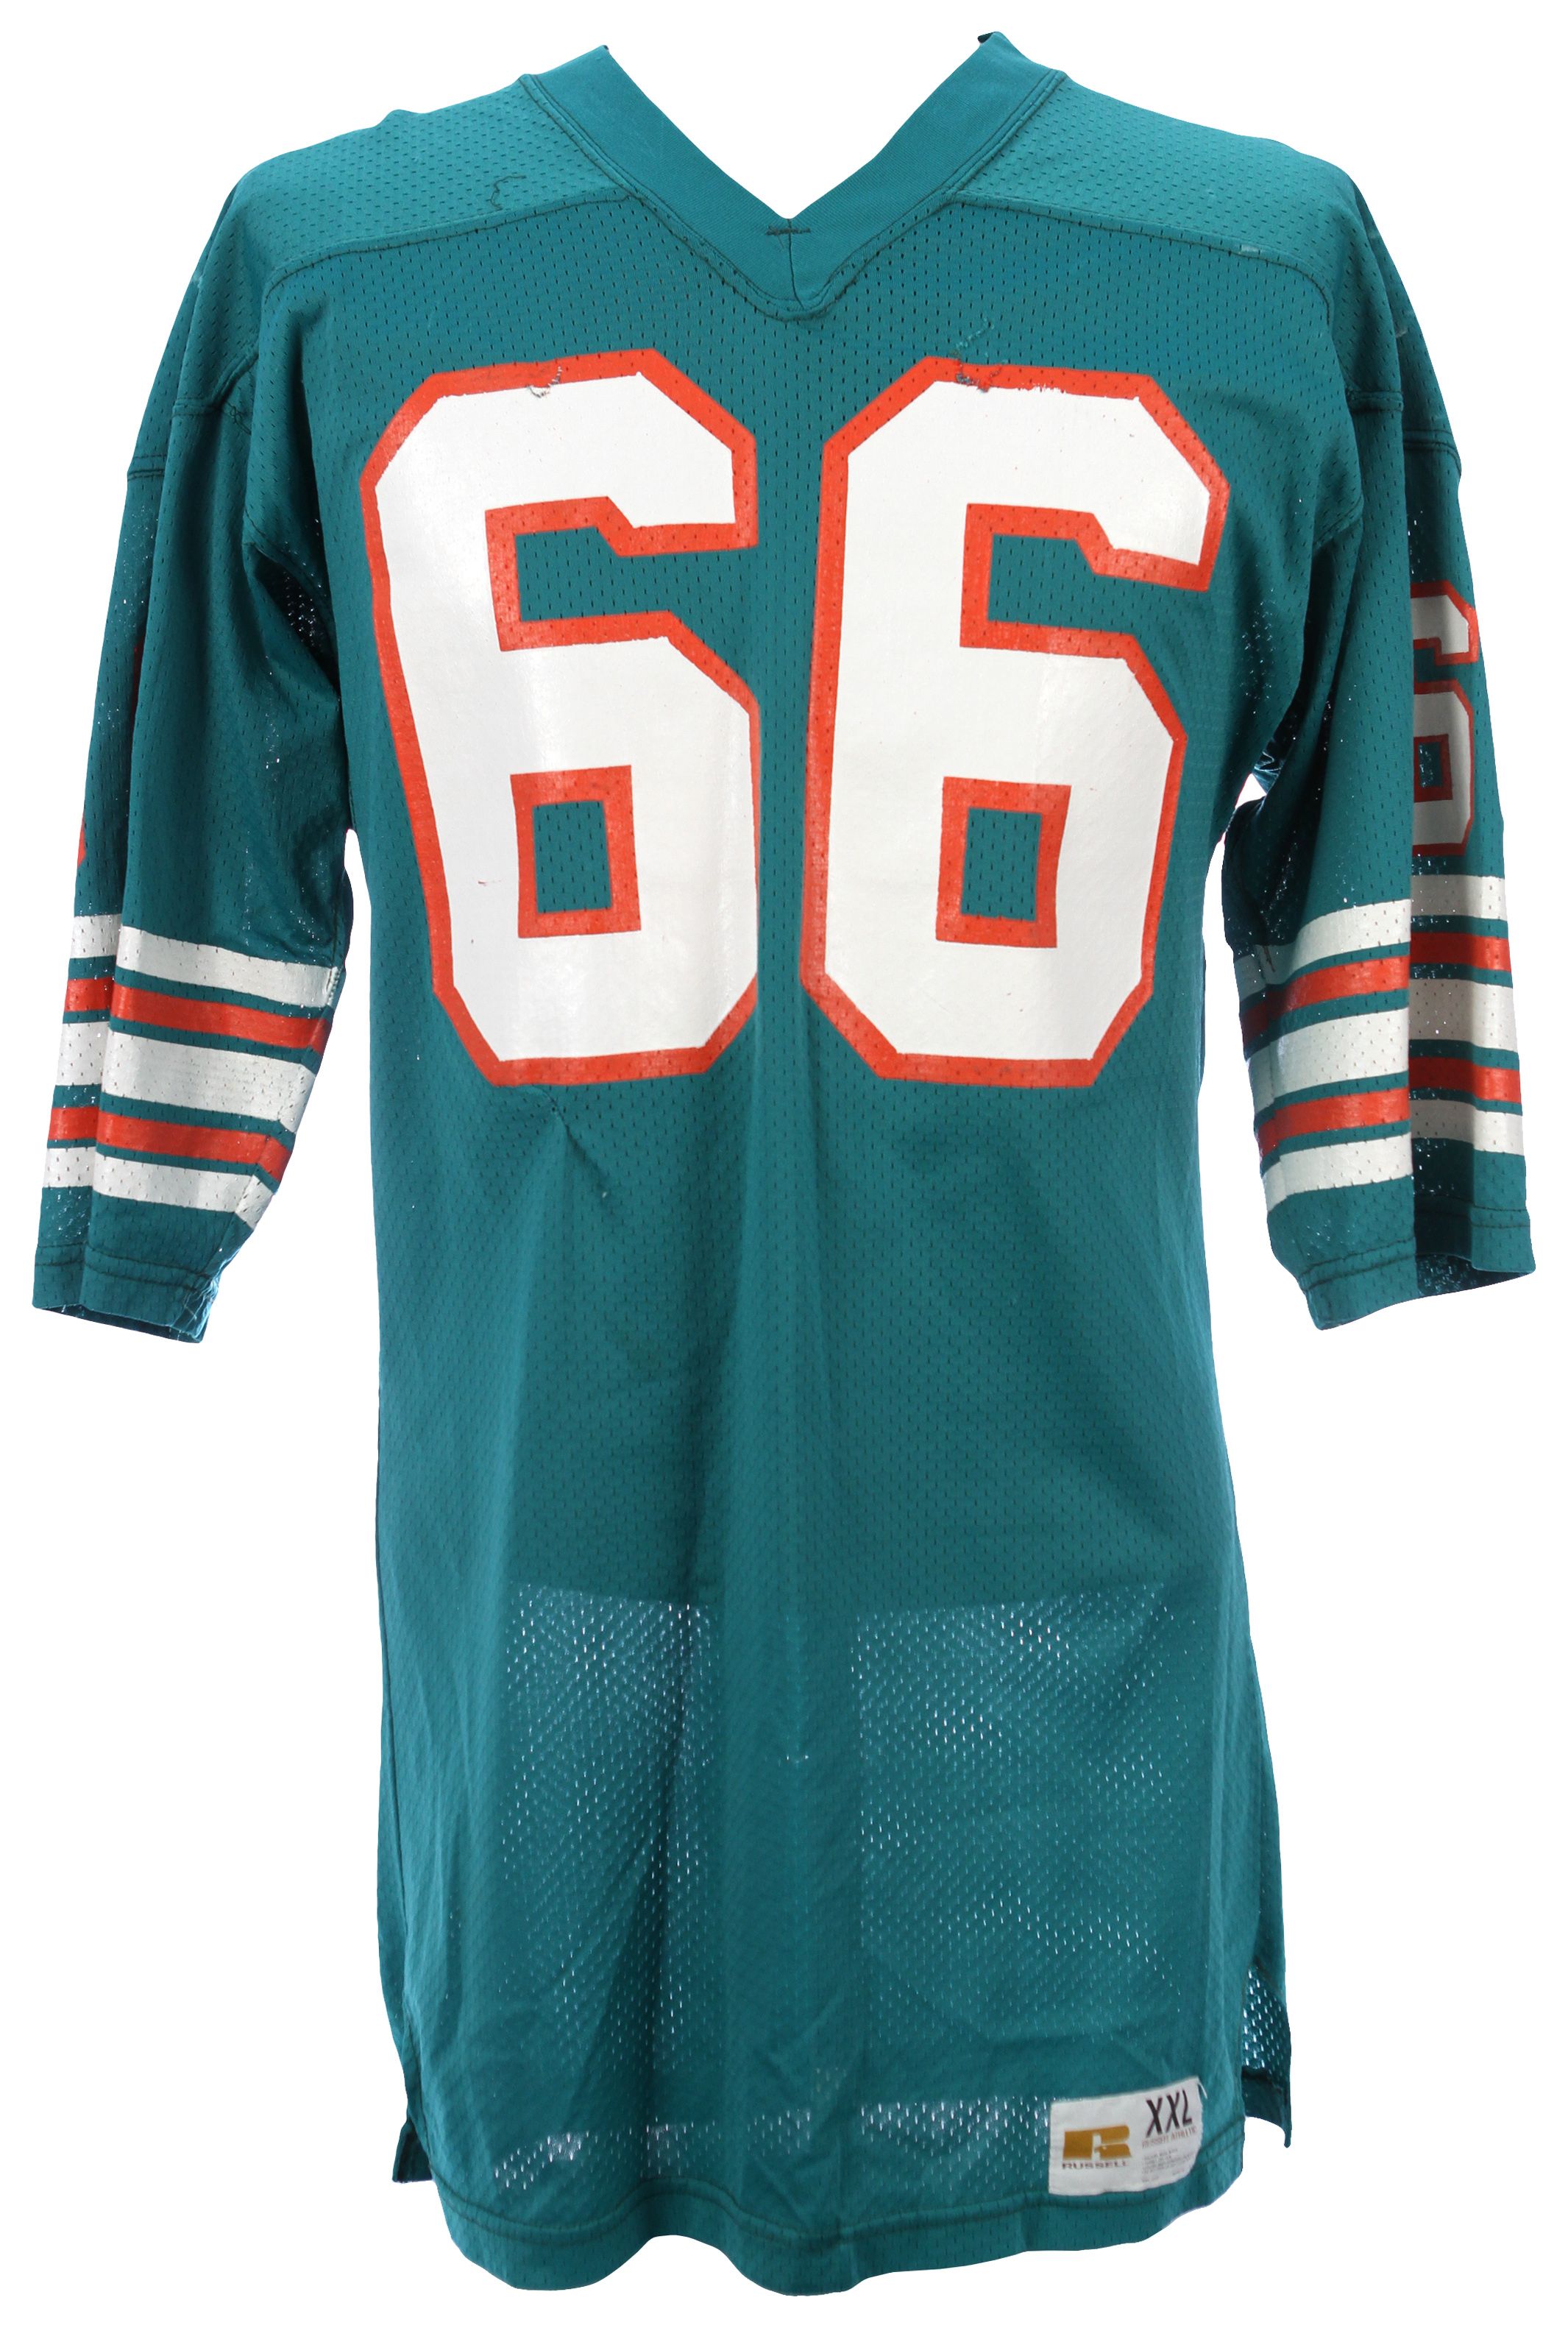 miami dolphins home jersey